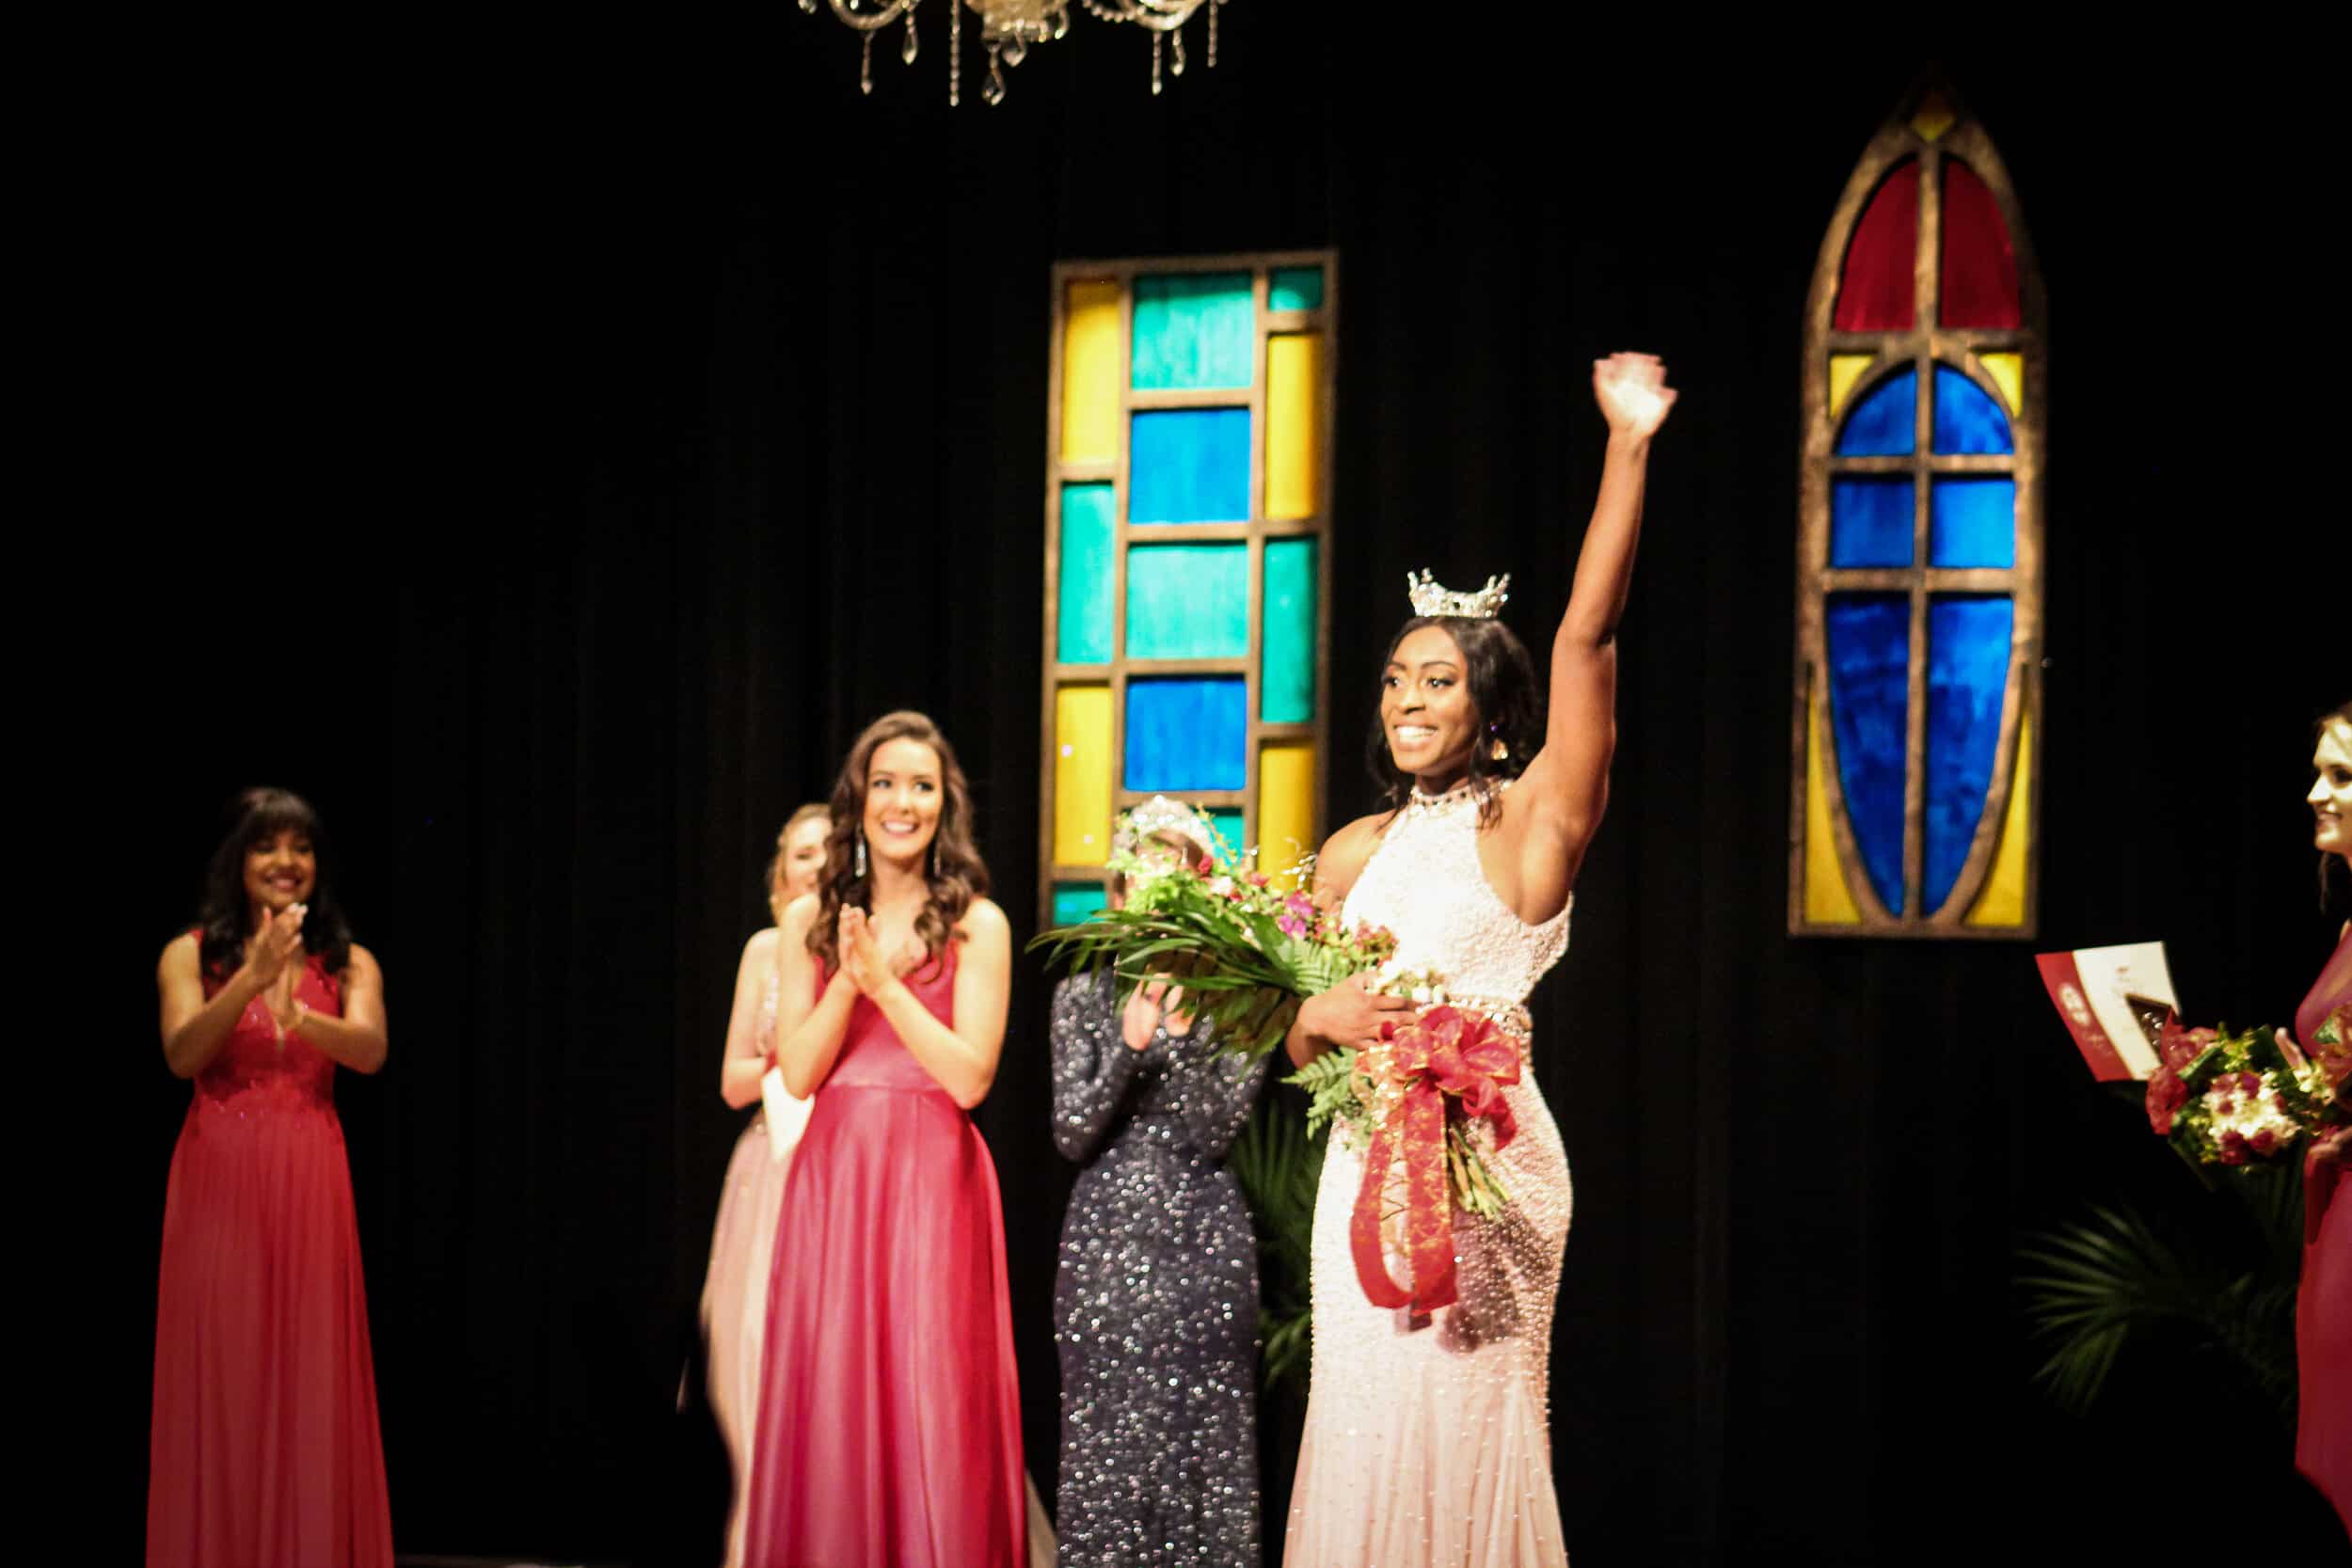 Kasie Thomas, Miss NGU, waving to the crowd after she is crowned.